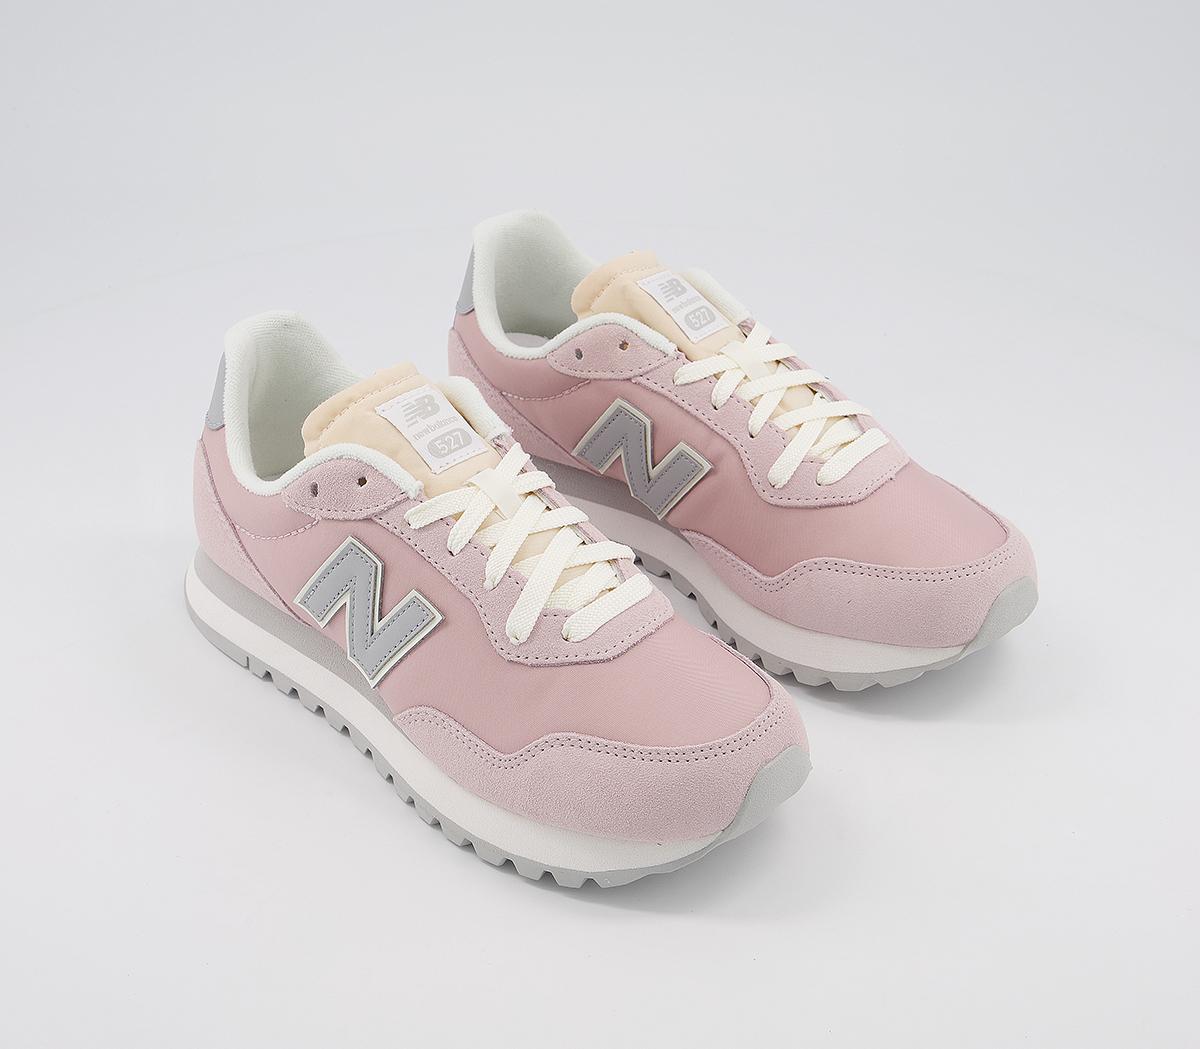 New Balance 527 Trainers Space Pink Rin Cloud - Hers trainers